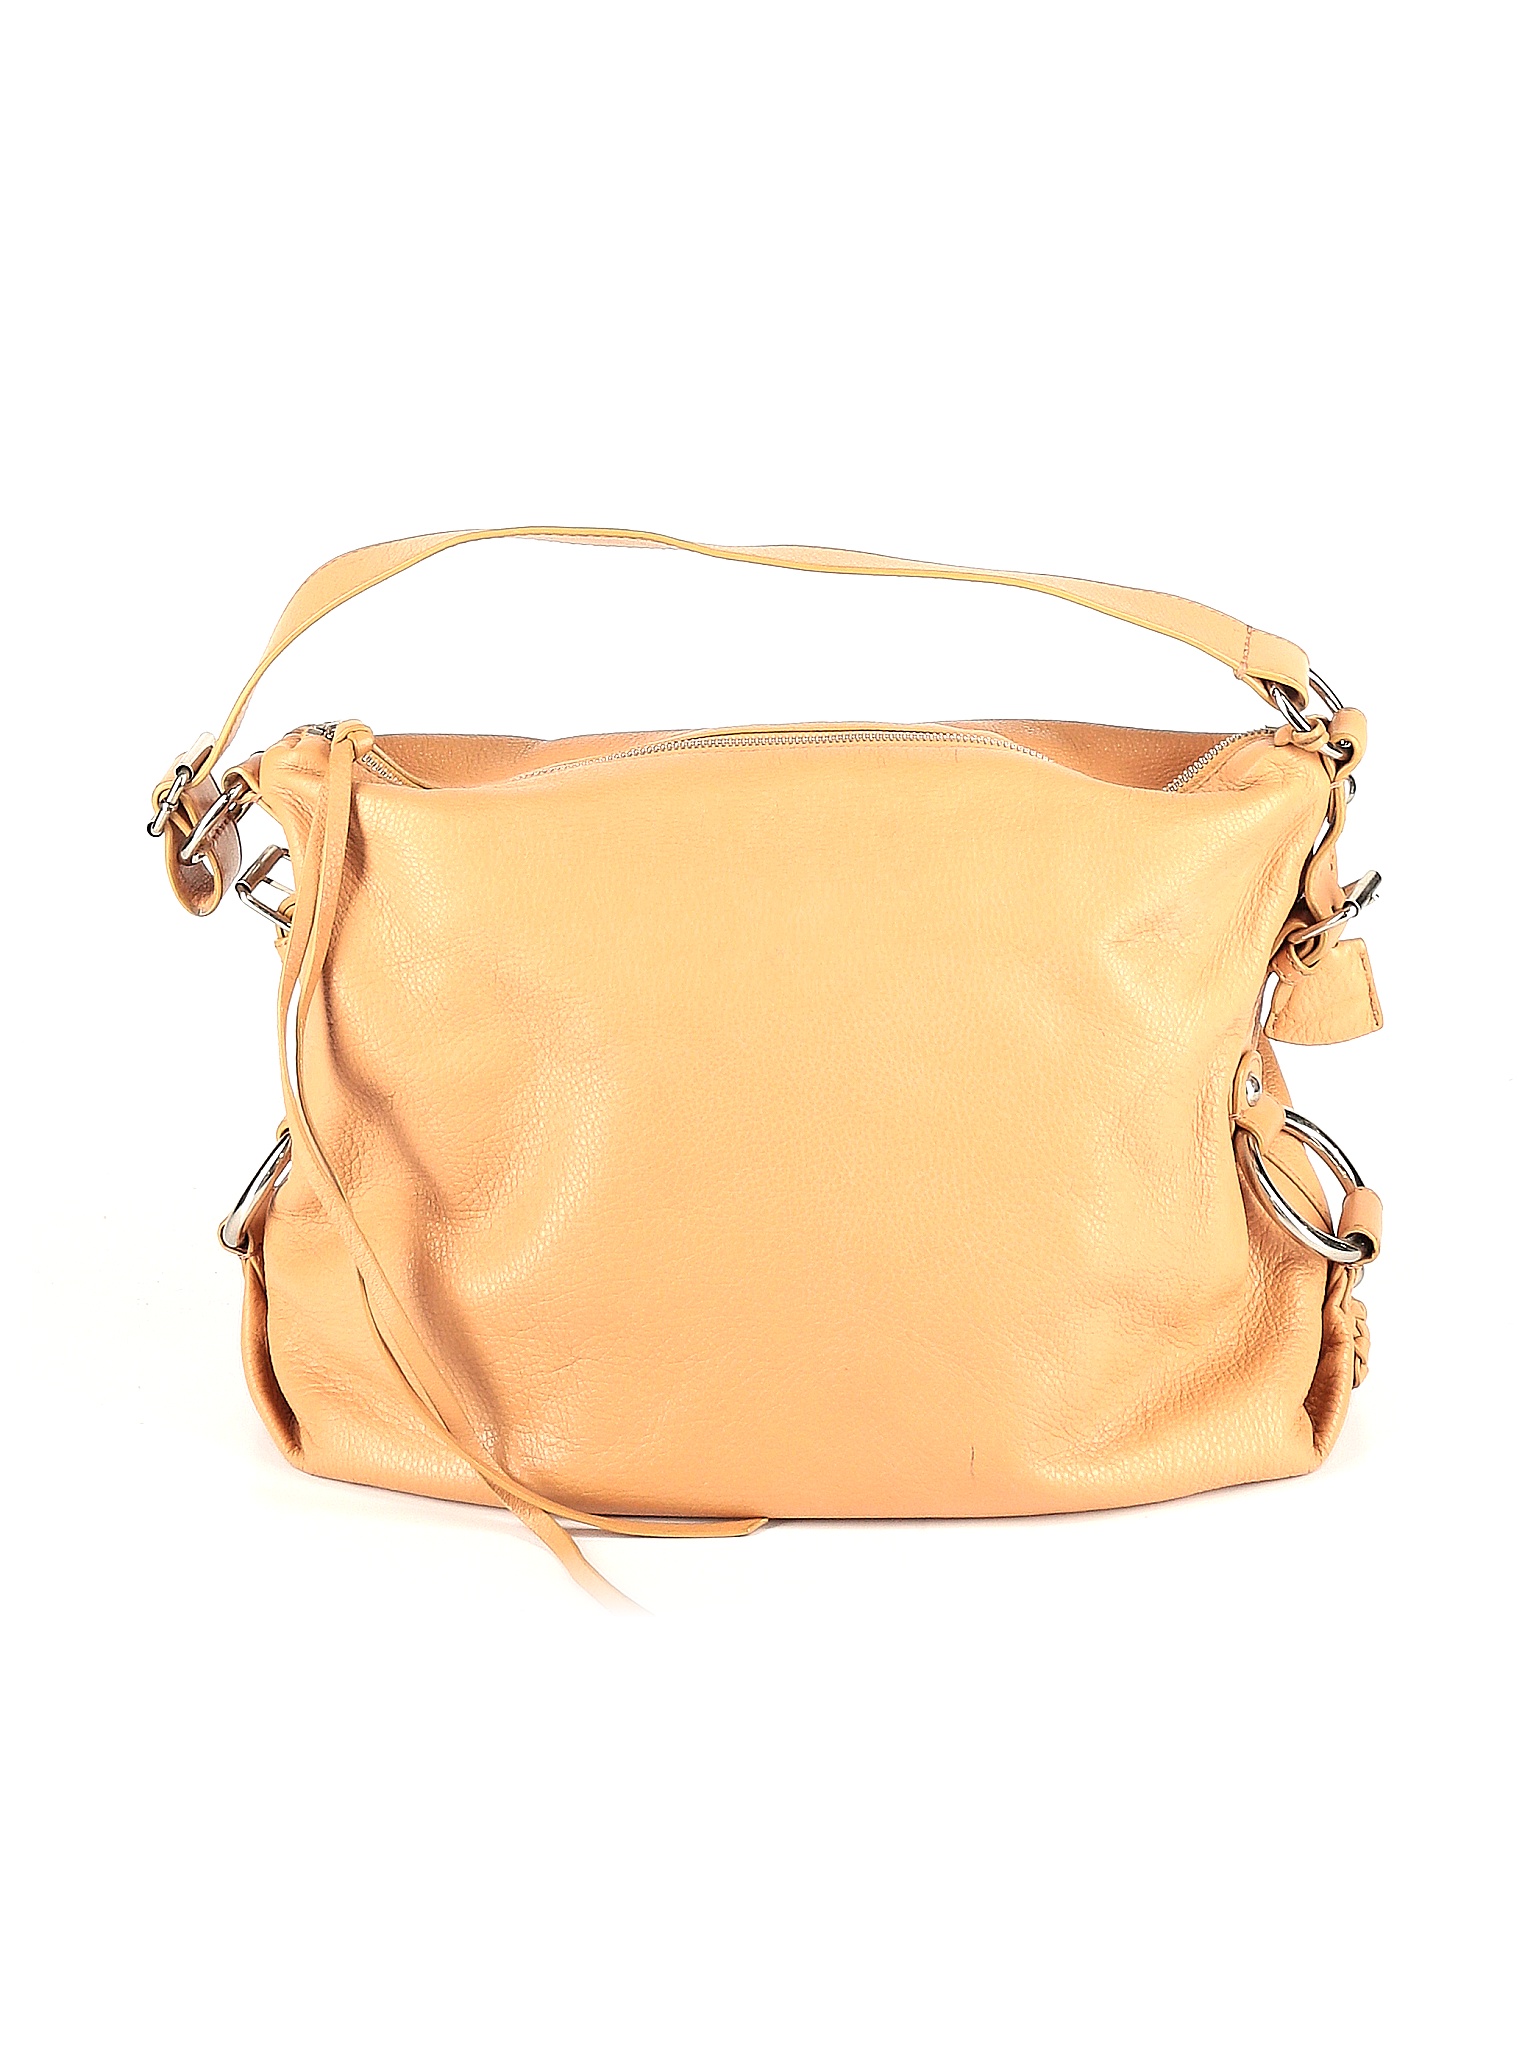 Banana Republic 100% Leather Solid Yellow Tan Leather Shoulder Bag One ...